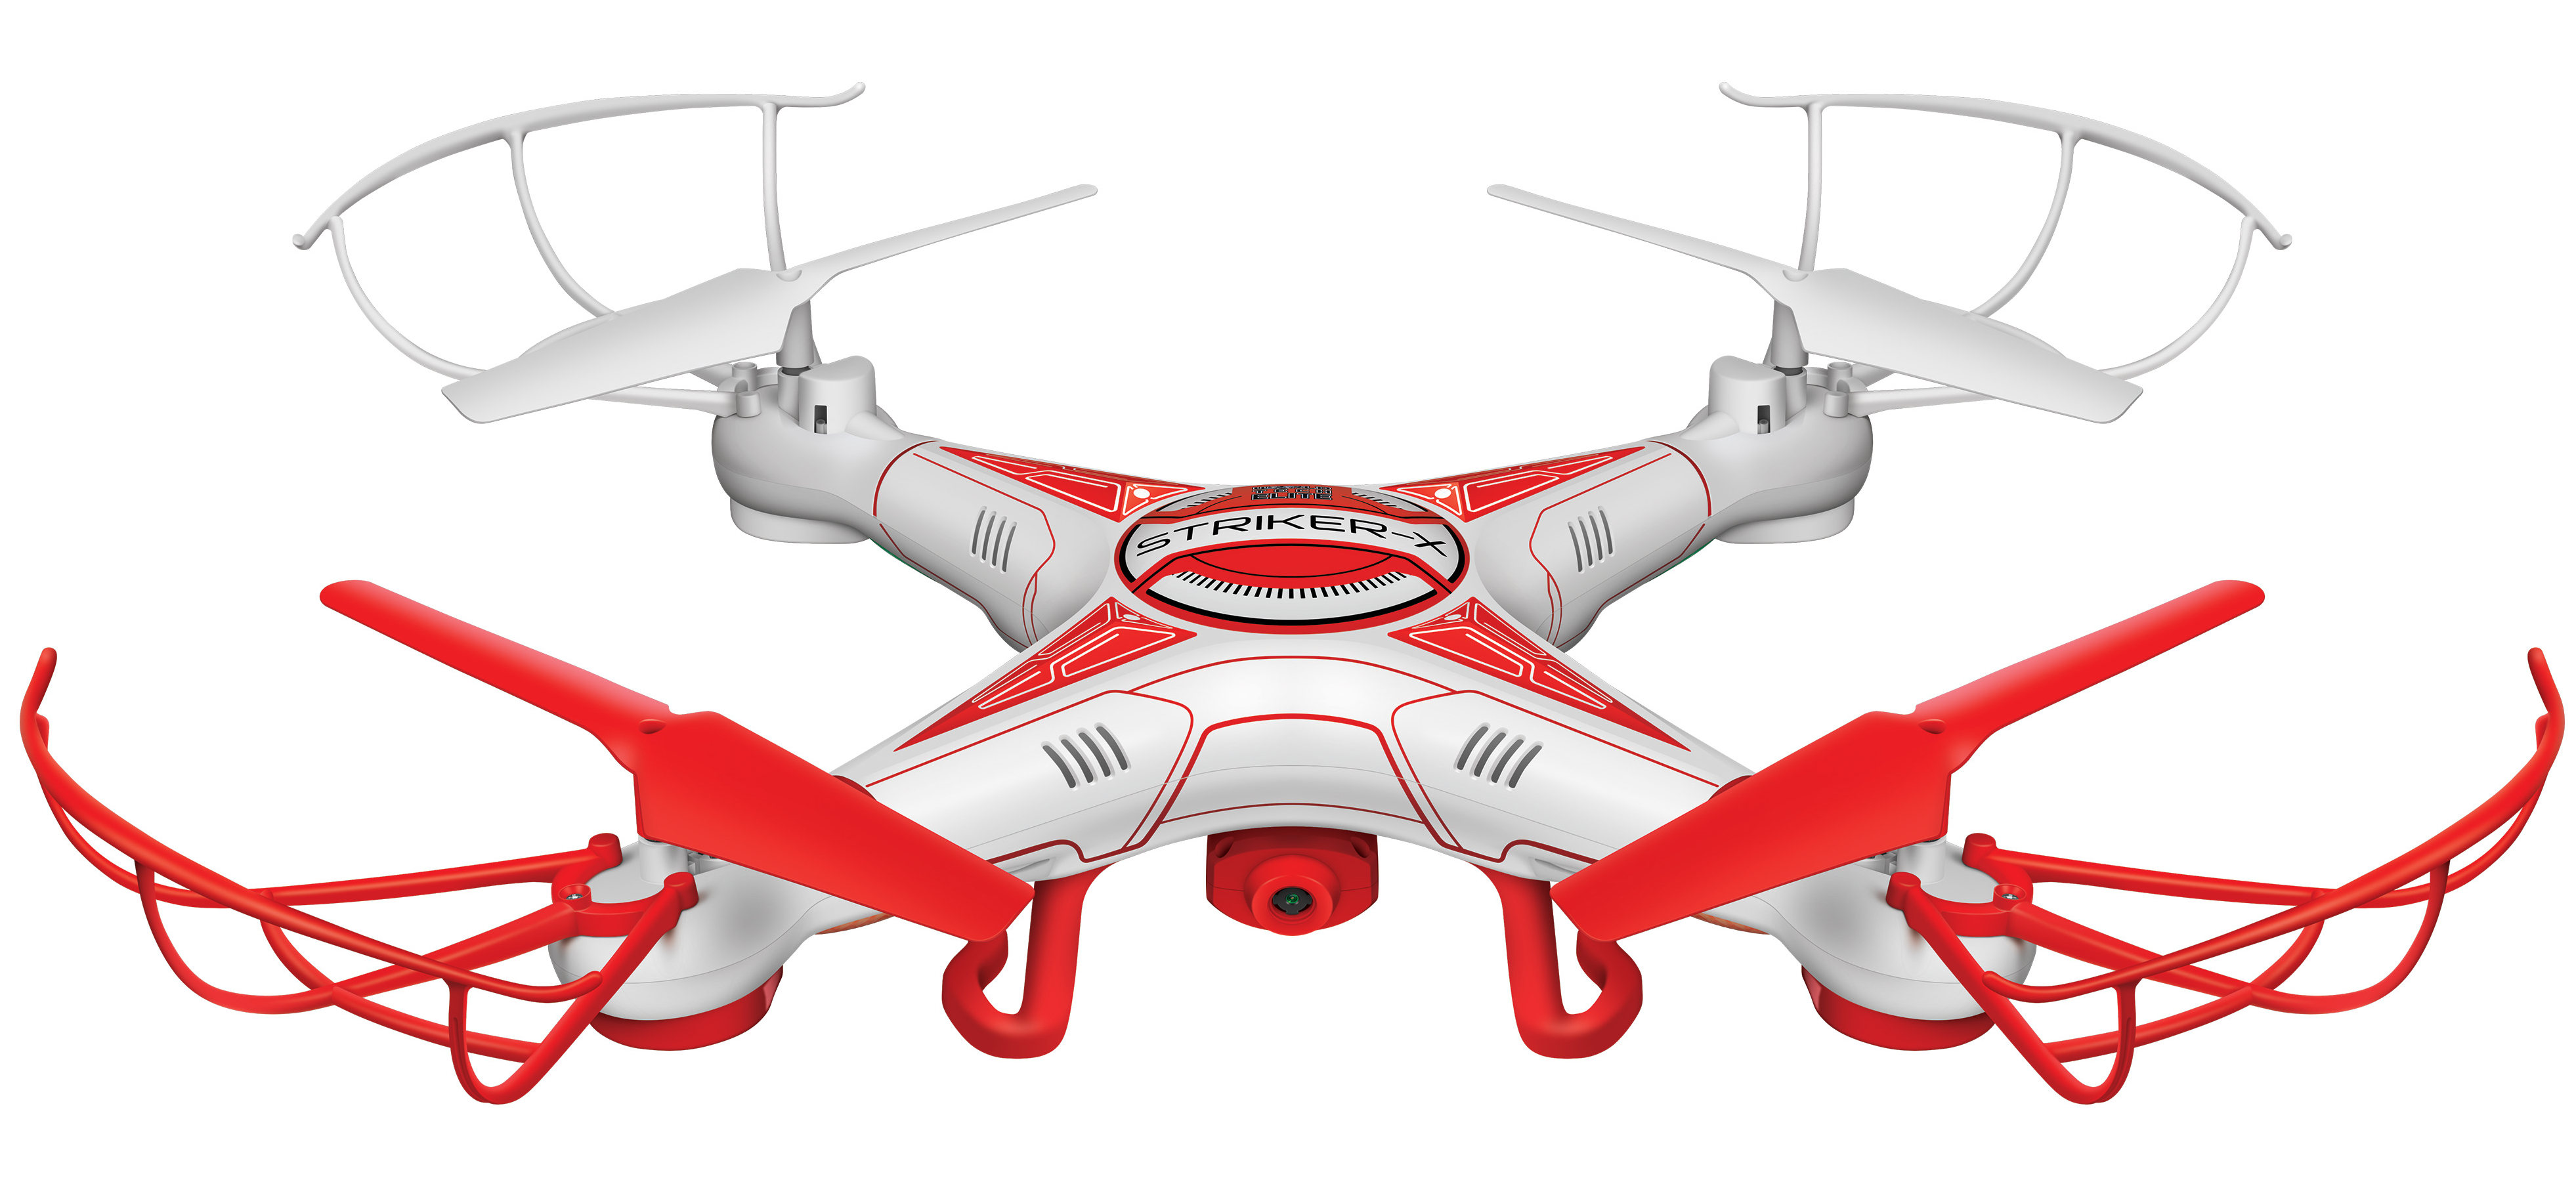 Striker-X HD Camera Drone 2.4GHz 4.5CH HD Picture/Video Camera RC Quadcopter - image 1 of 6